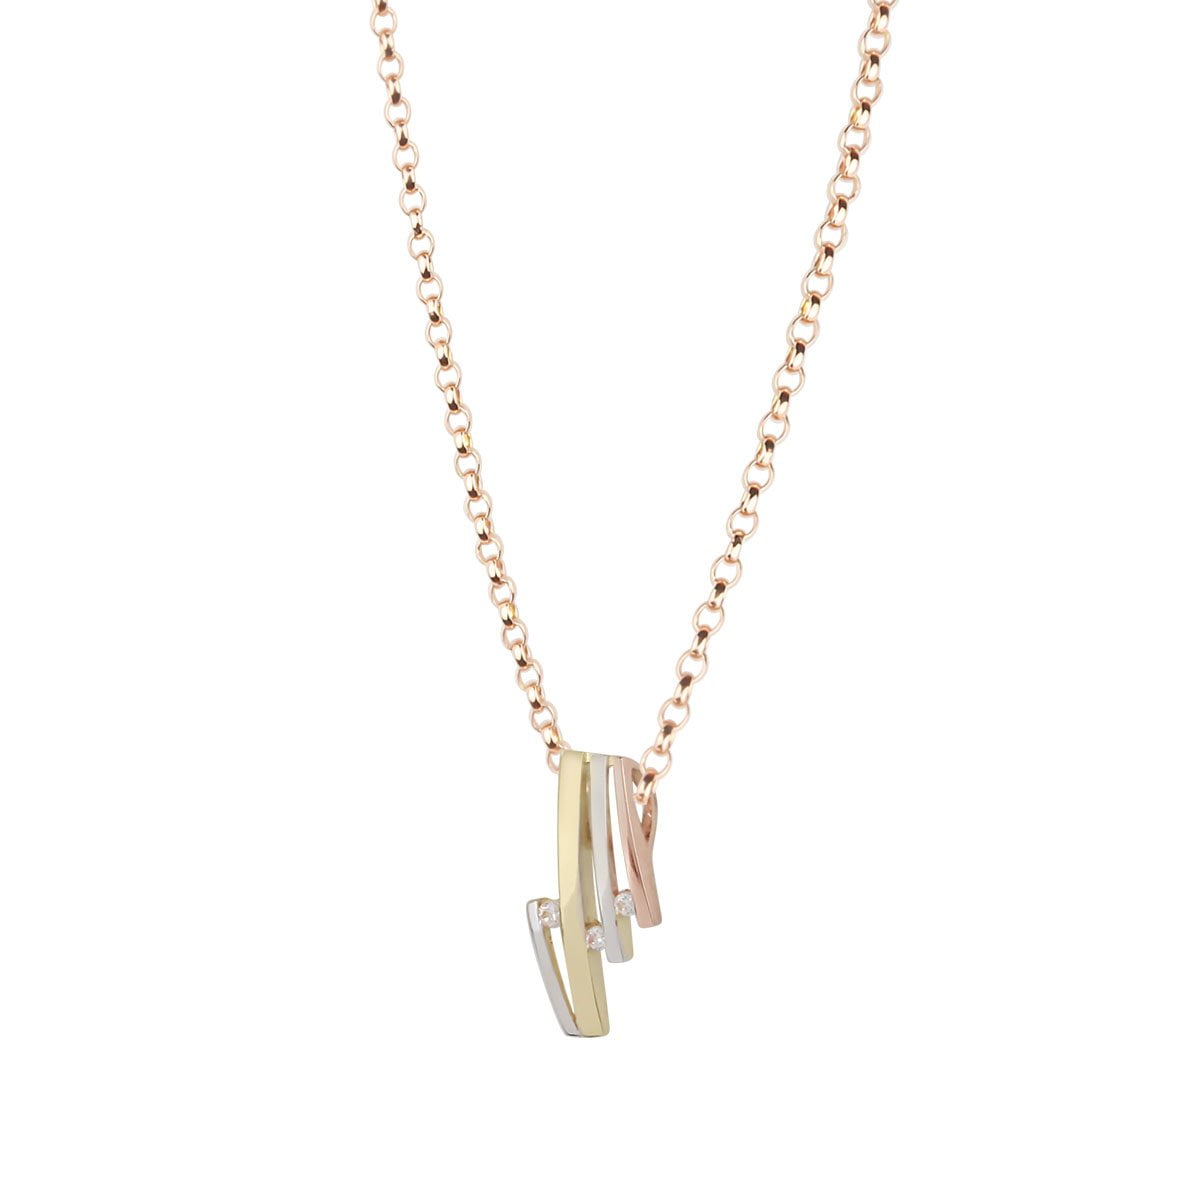 18ct White, Rose & Yellow Gold Trio Necklace